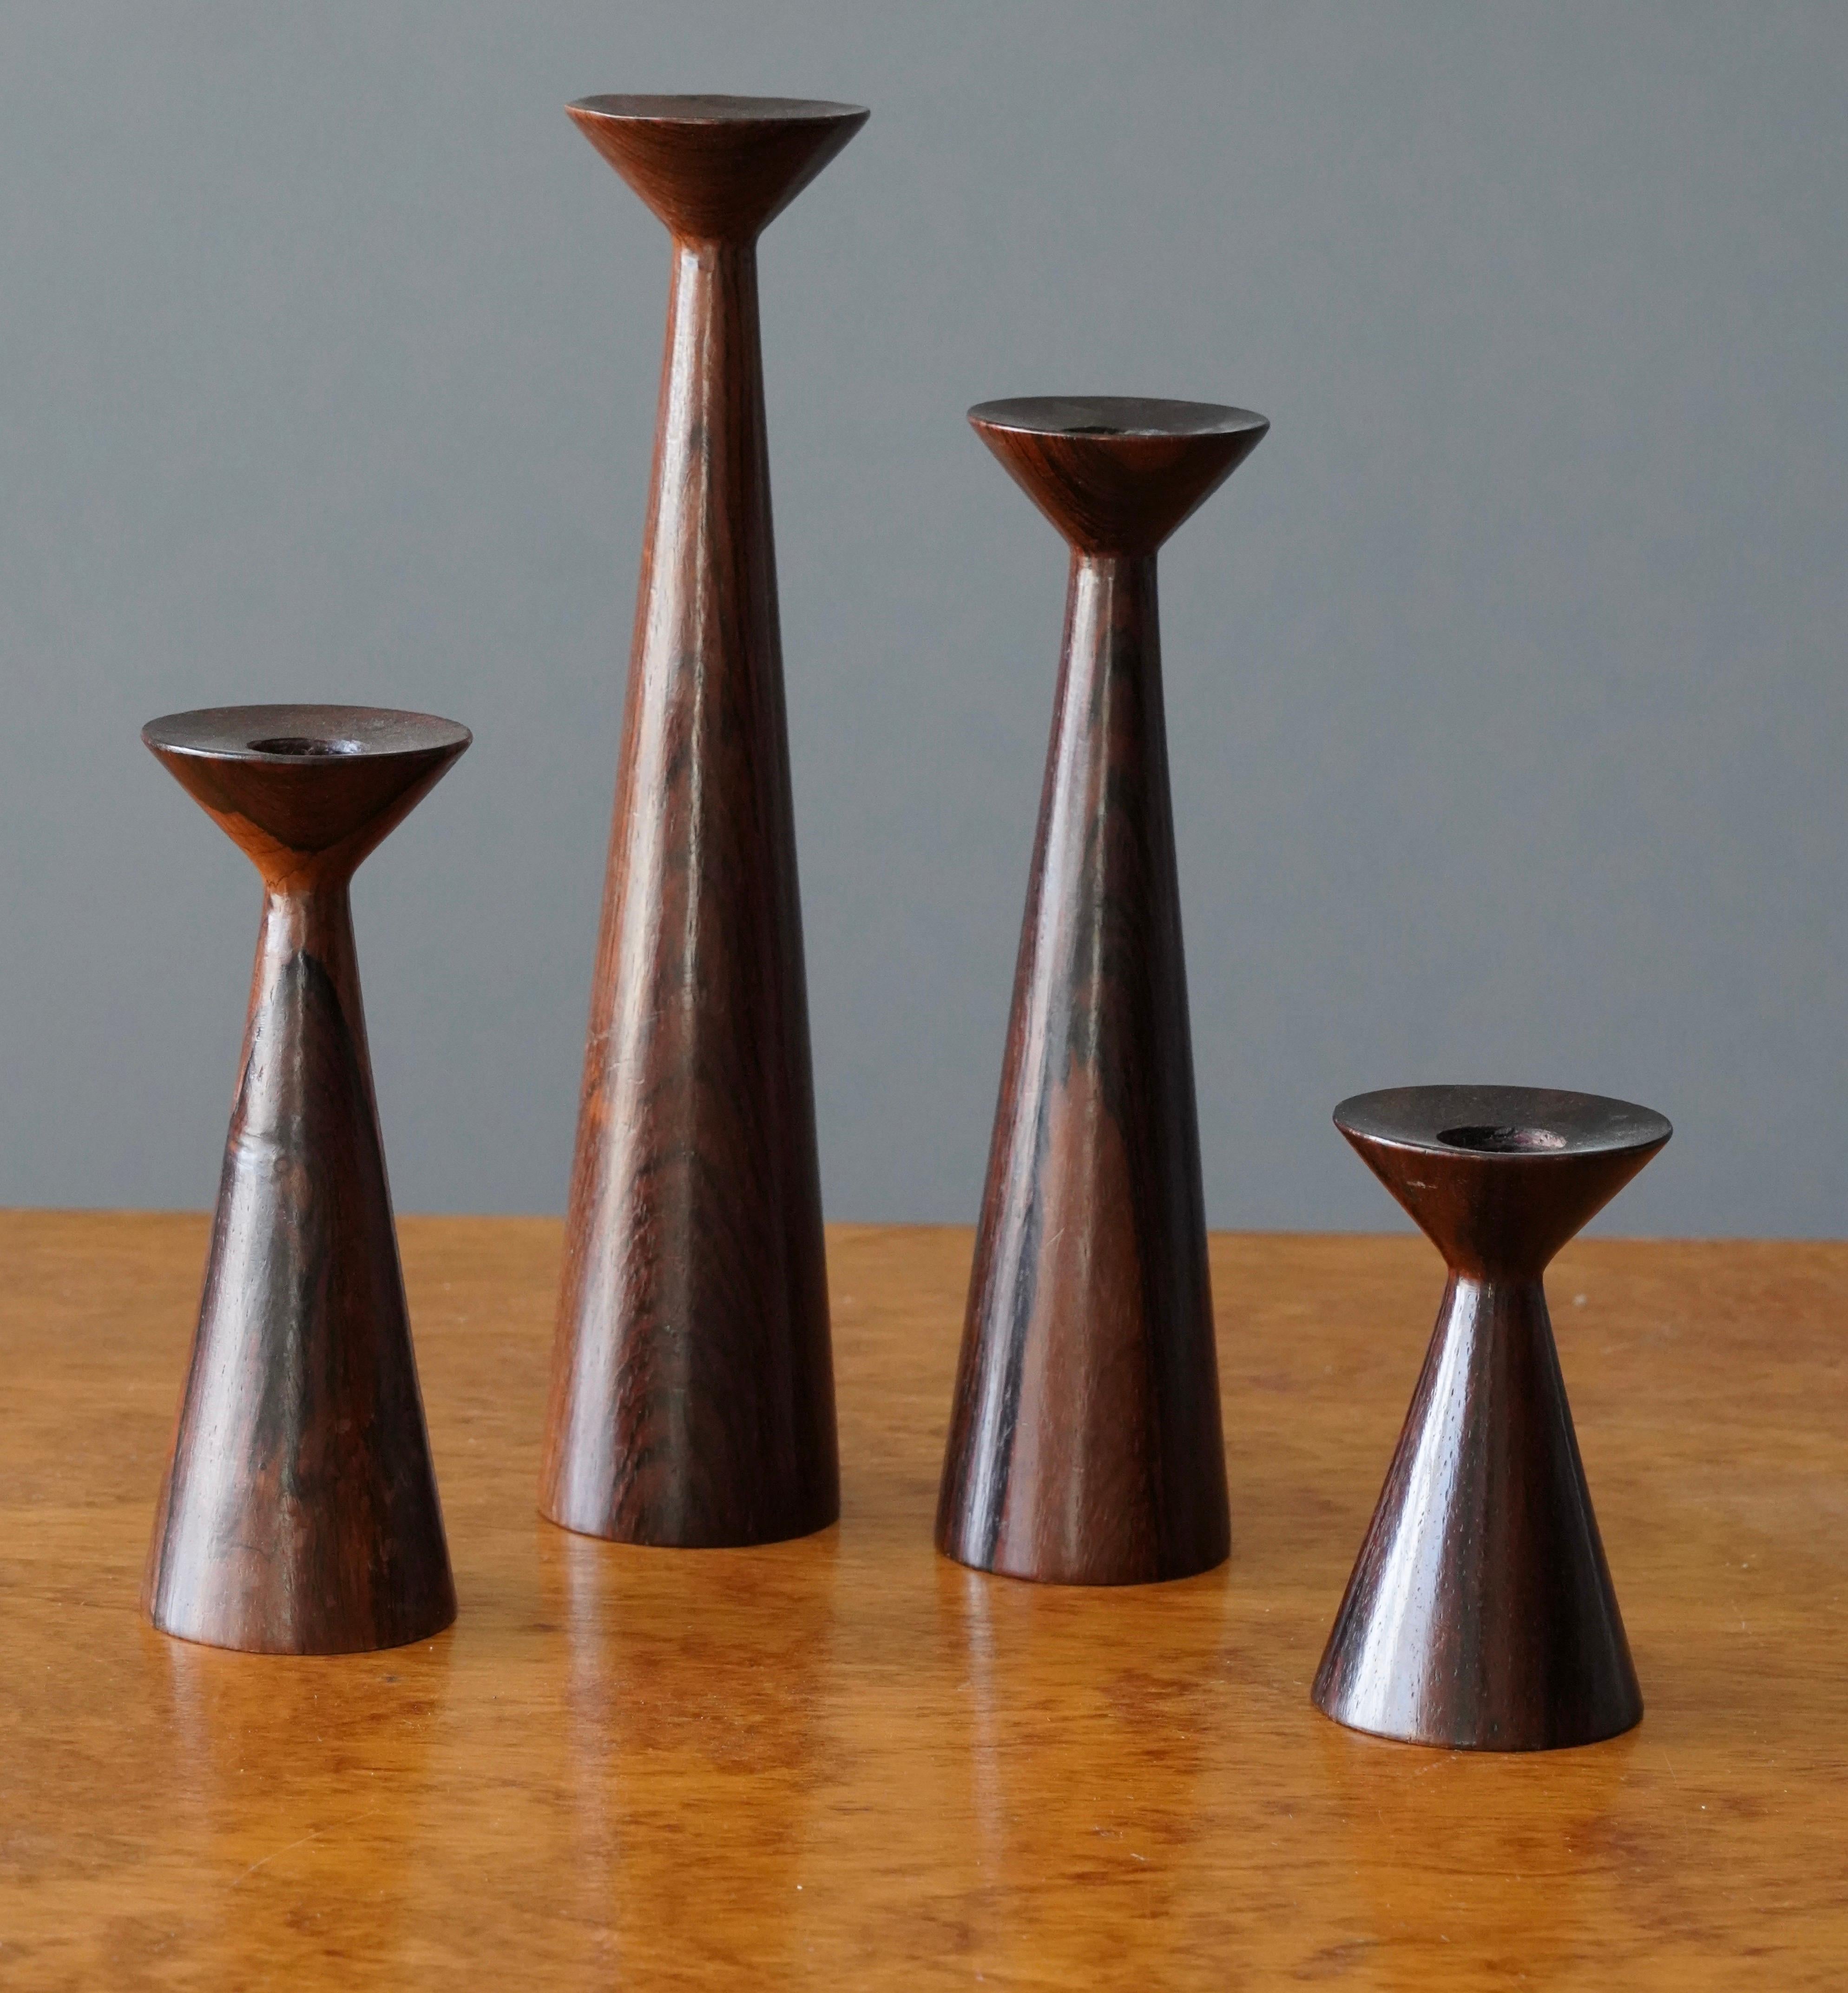 A set of four candlesticks, in solid turned rosewood.

Dimensions of each in decreasing order of height: 2.13 inches in diameter x 10 inches tall, 2.13 inches in diameter x 8 inches, 2.13 inches in diameter x 6 inches tall, 2.13 inches in diameter